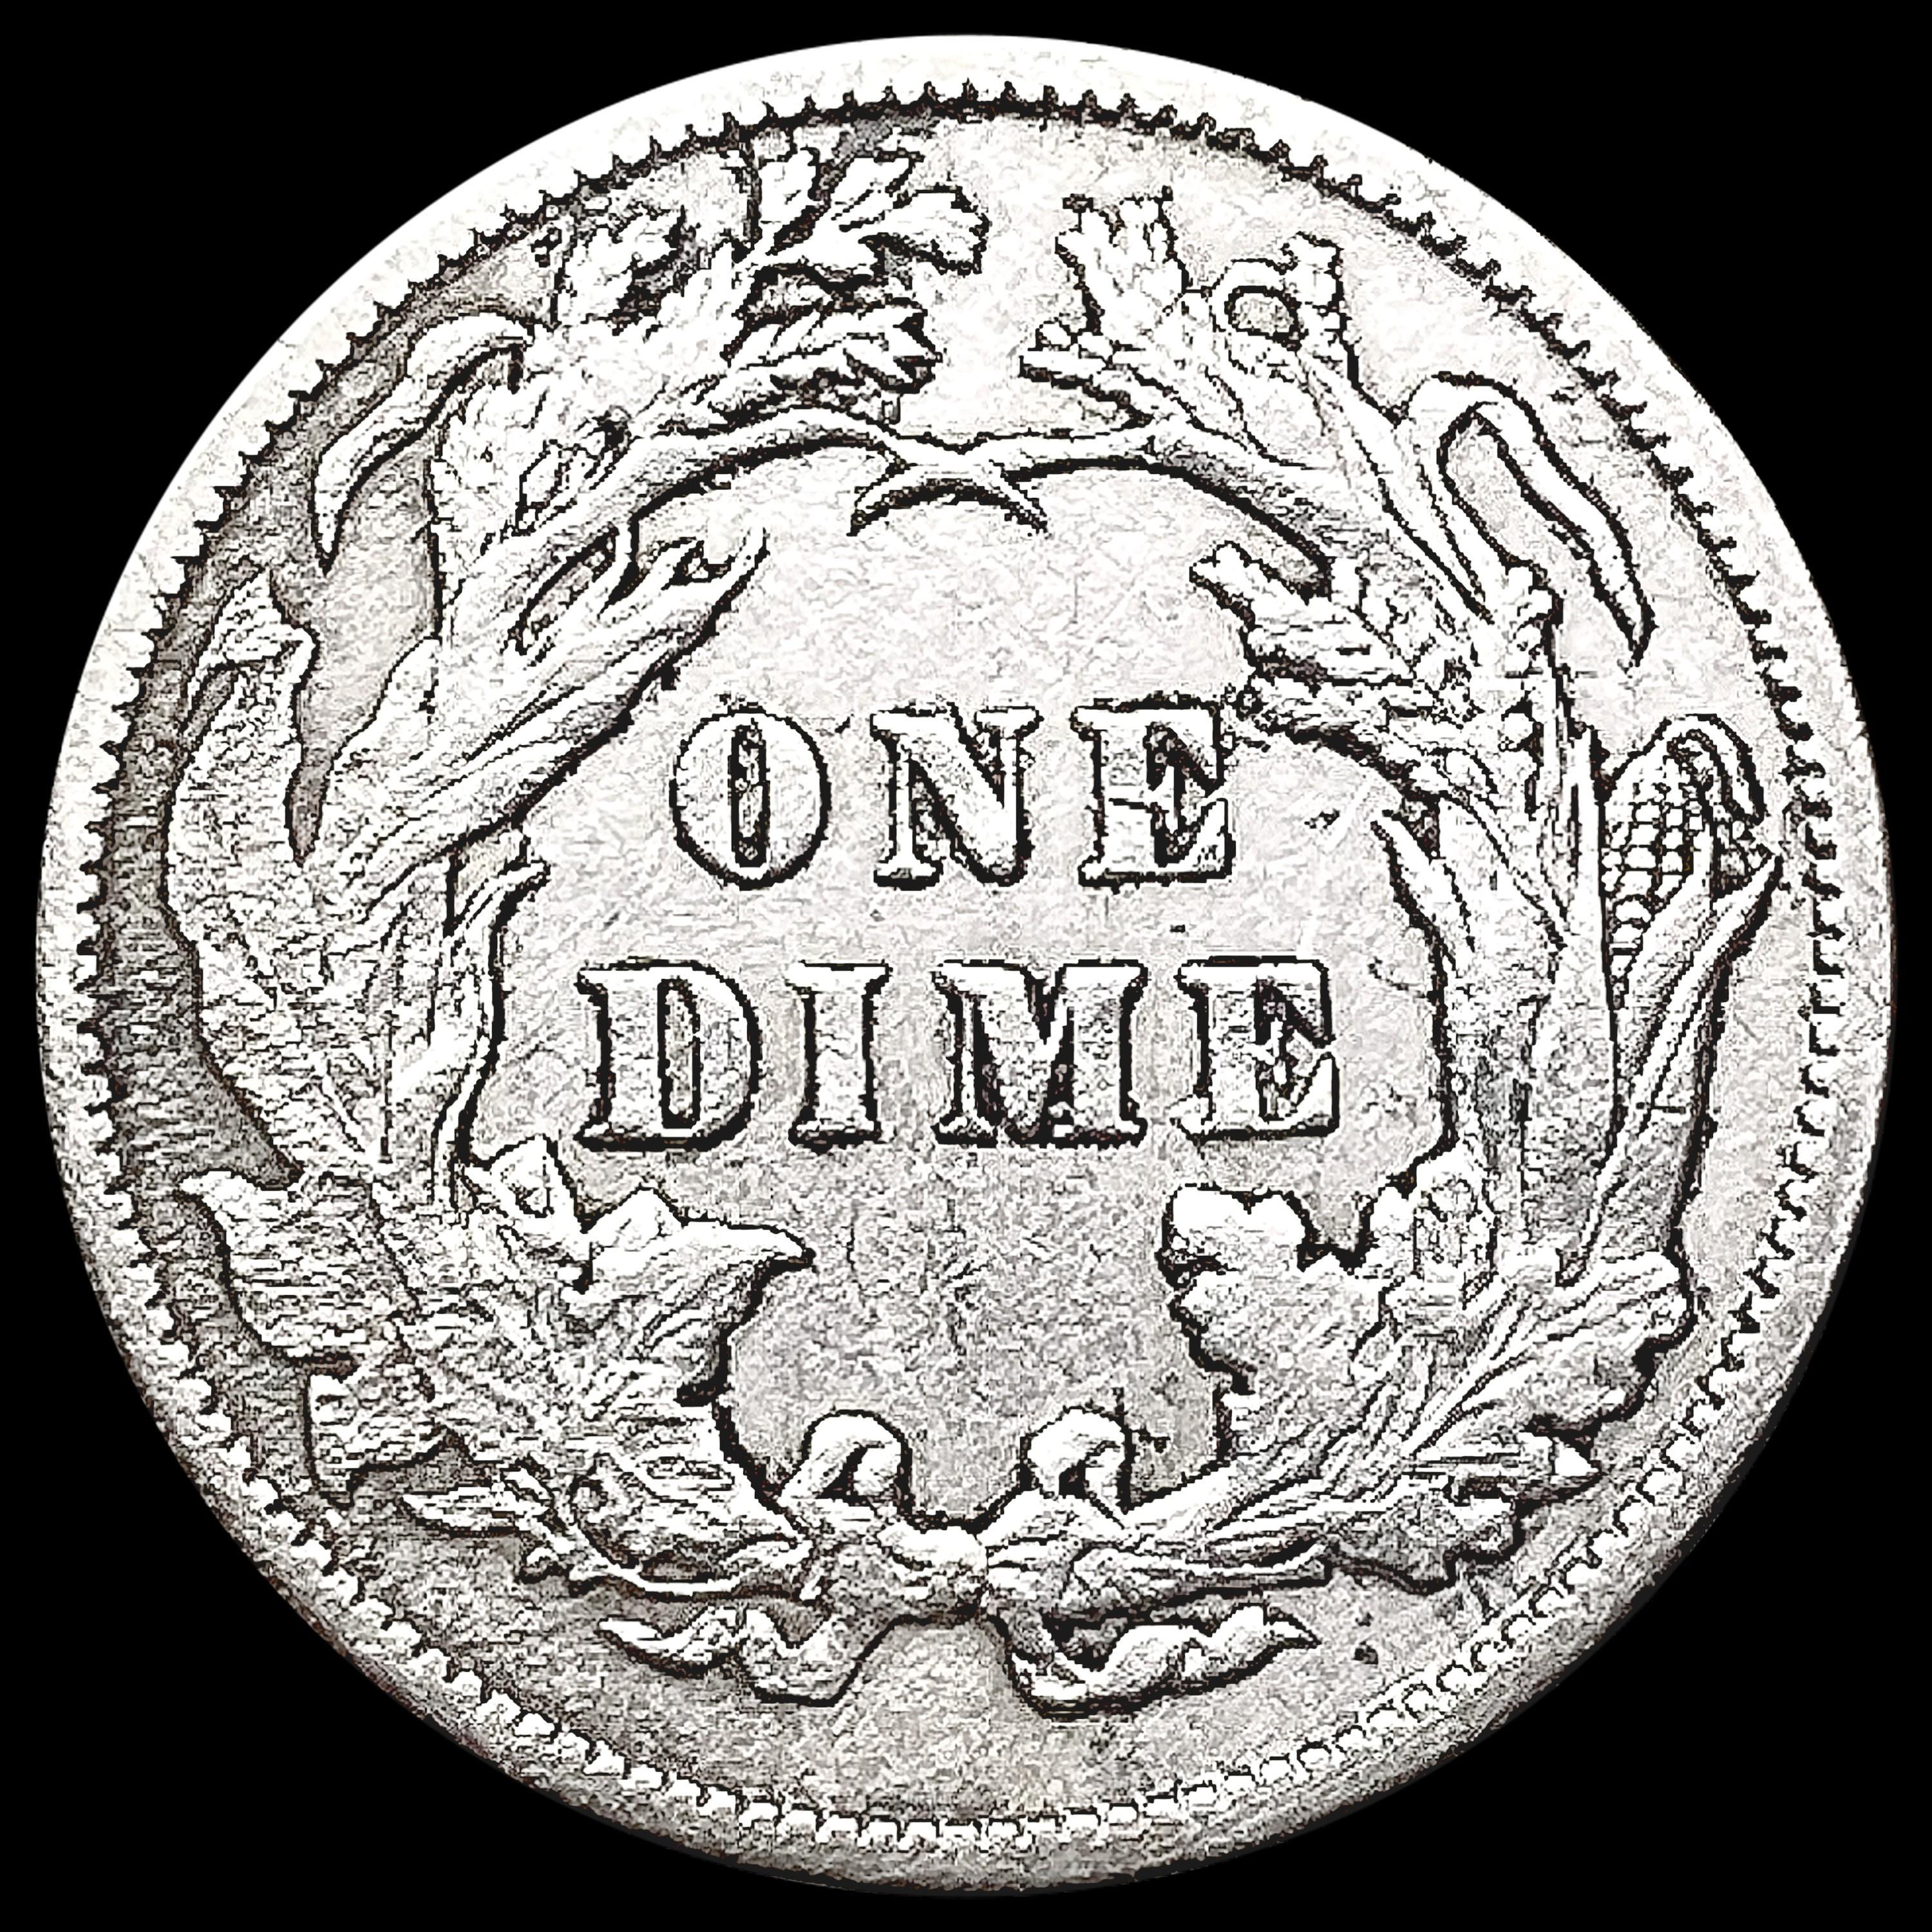 1888 Seated Liberty Dime CLOSELY UNCIRCULATED